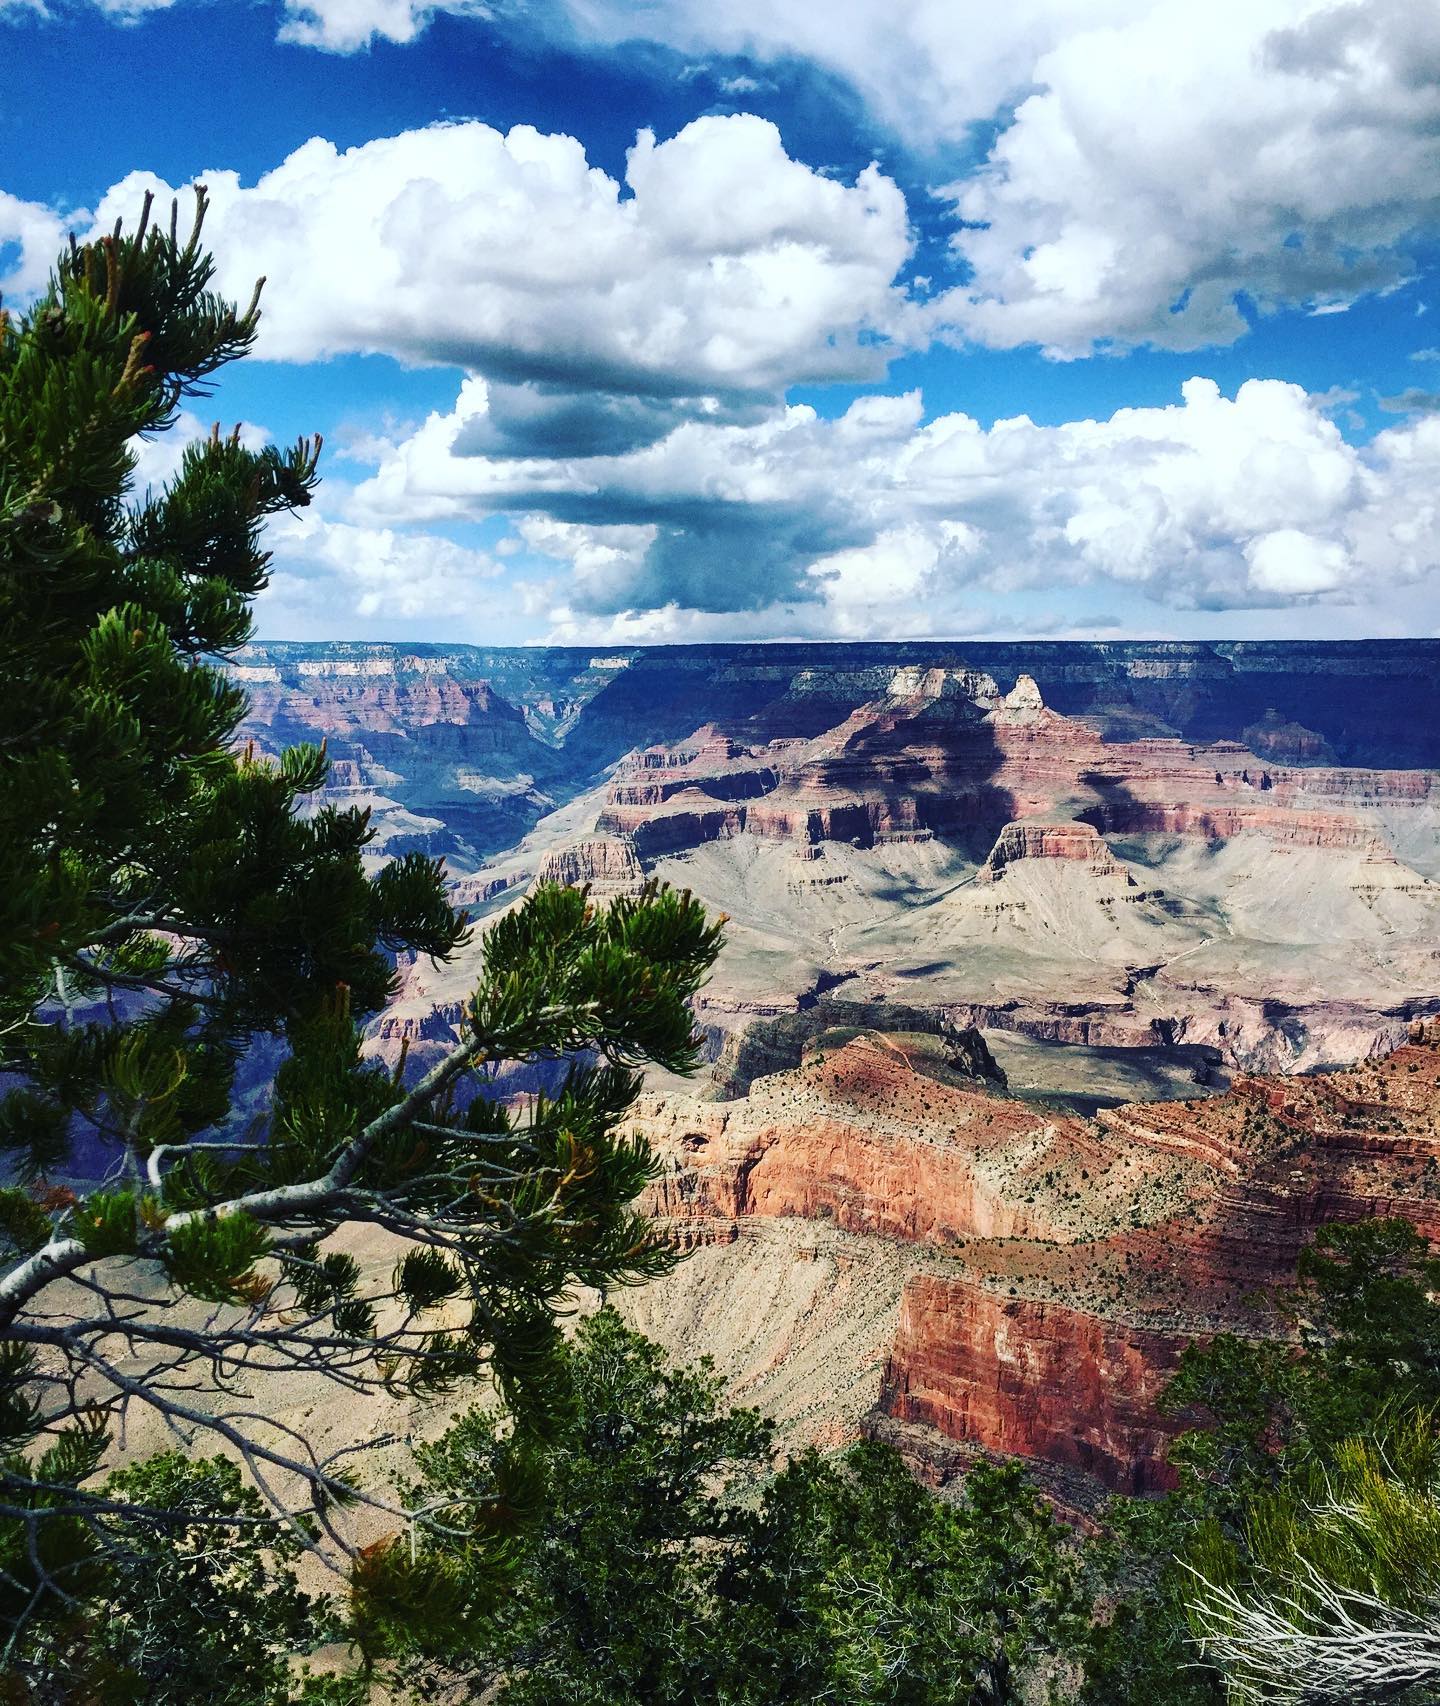 Grand Canyon NP, Arizona
The Grand Canyon is something everyone needs to see at least once. We were totally impressed at our first visit. Standing at the rim's edge left us in great awe. 
What was your first impression?

#usa #us #usatravel #usatravels #usatrip #arizona #arizonagram #grandcanyon #grandcanyonnationalpark #grandcanyonnps #grandcanyonstate #visitarizona #arizonanature #nature_perfection #naturelovers #awesometravel #awesomeearth #awesome_earthpix #arizonaphotographer #beautifuldestinations #beautifulplaces #explorearizona #passportpassion #picoftheday #naturephotography #travelphotography #traveltheworld #exploretheworld #travelcouple #travelgoals